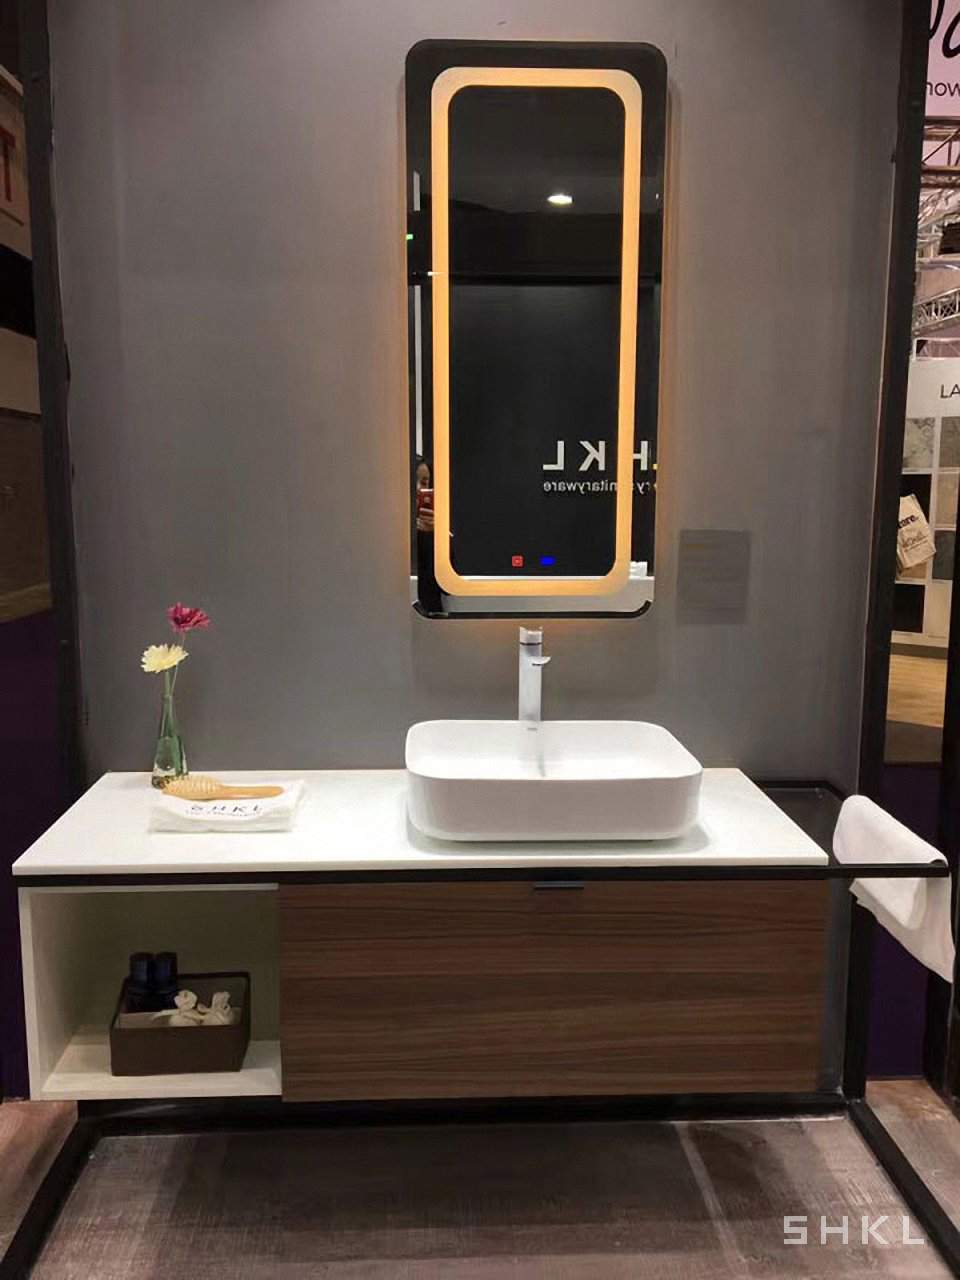 KBIS 2018, SHKL attended KBIS the 2nd time, leading the trend of bathroom vanities 9